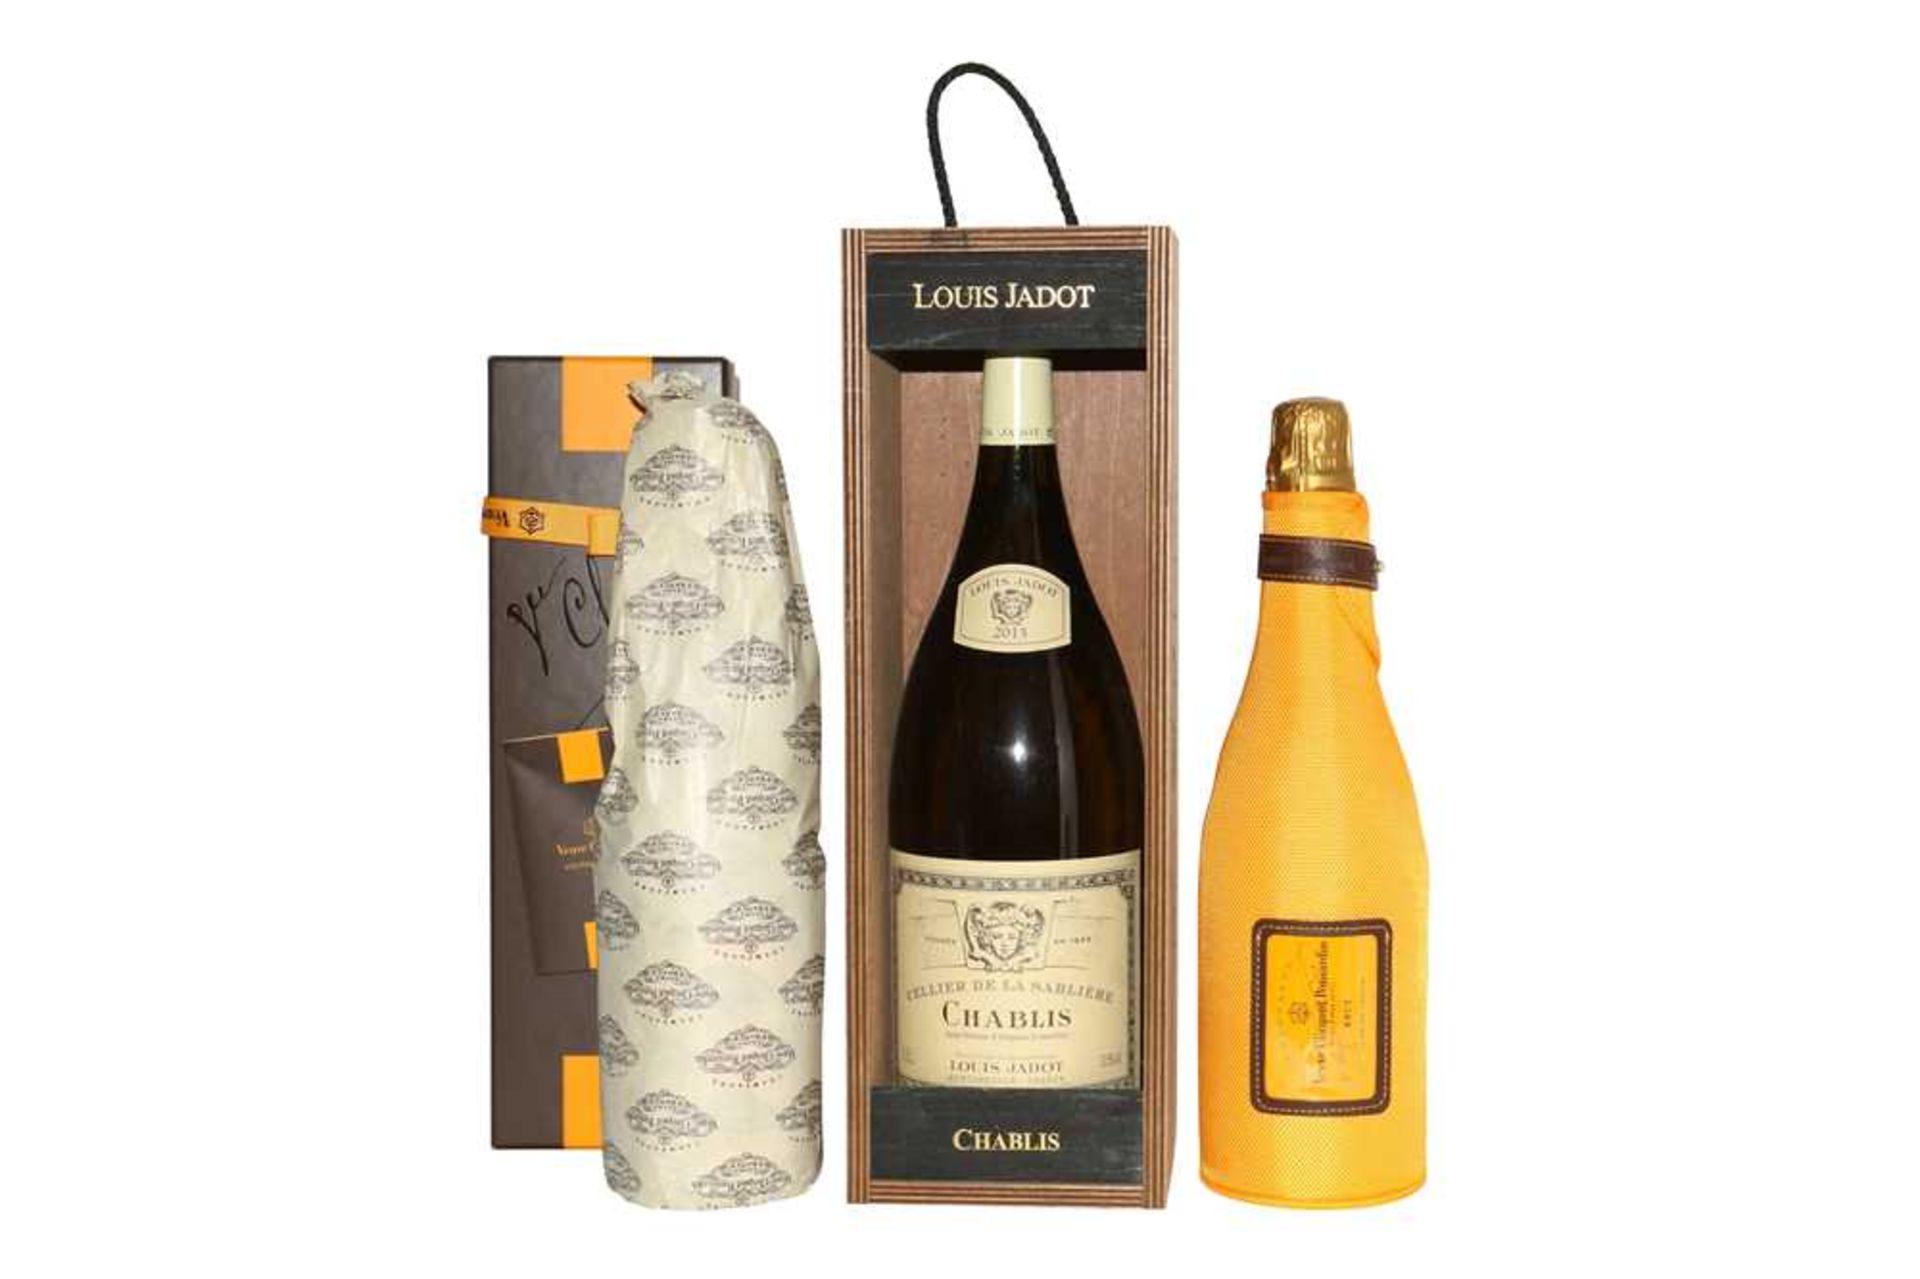 Two Bottles of Veuve Clicquot and a Magnum of Chablis